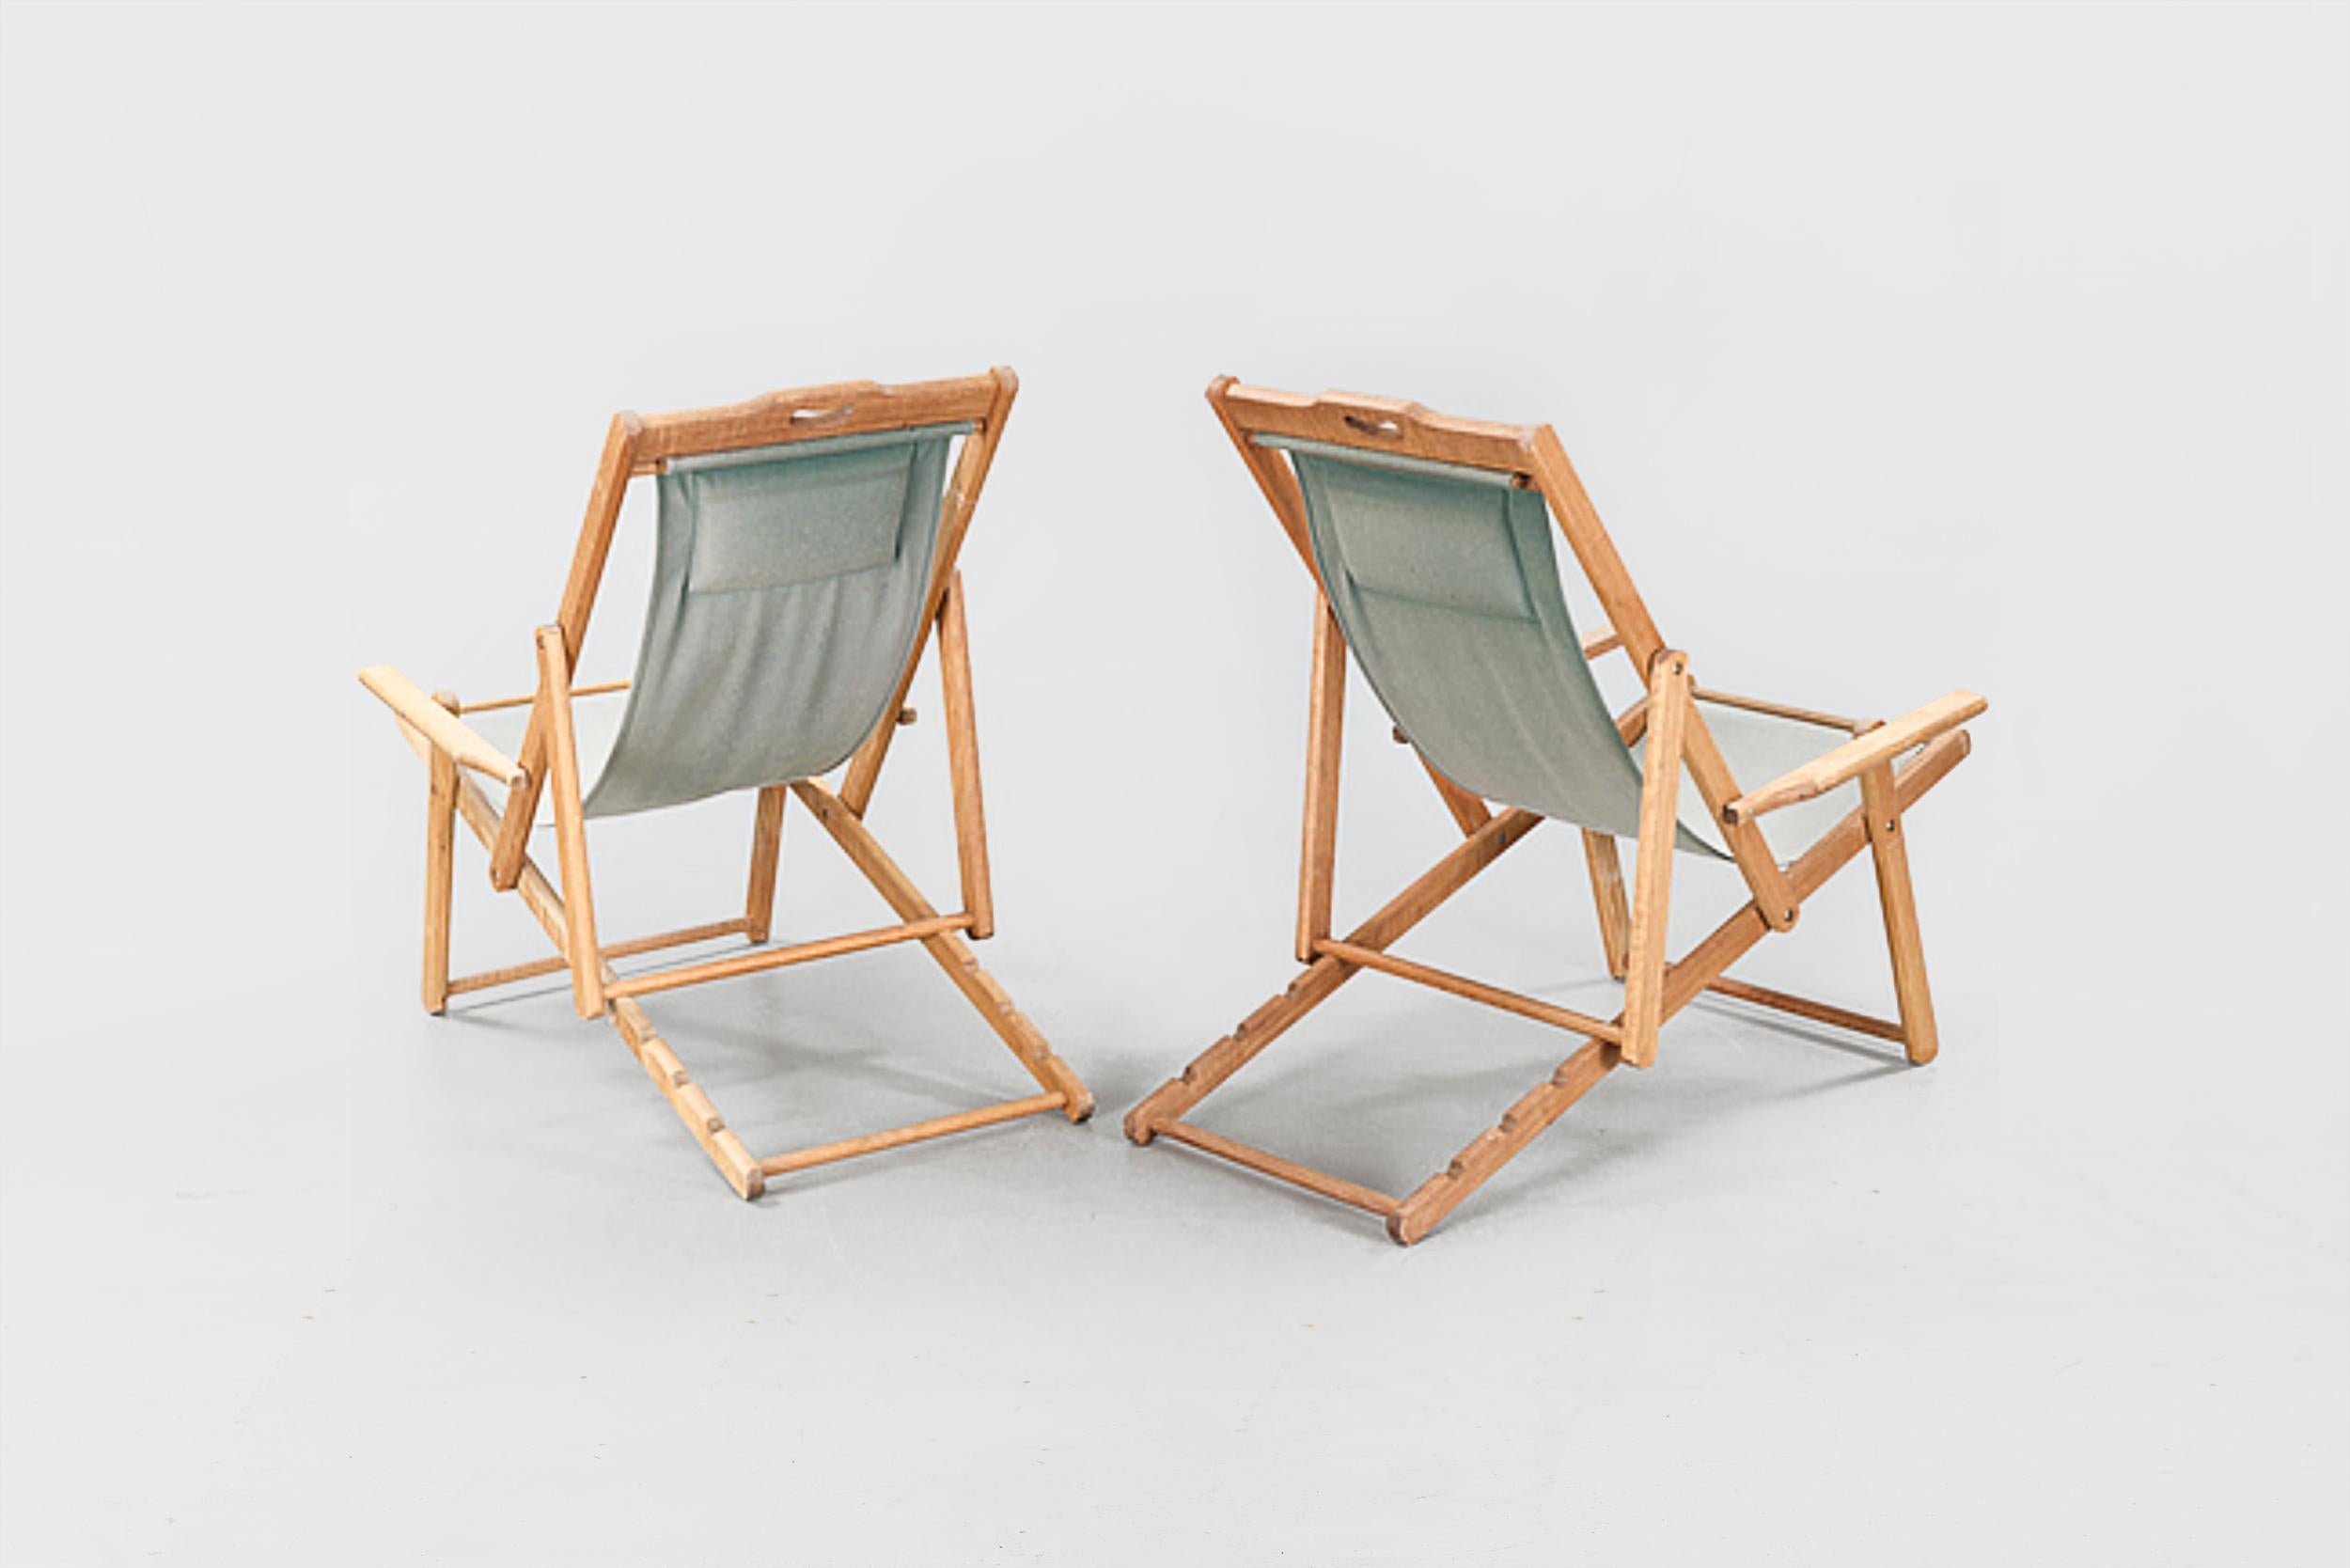 20th century Swedish deckchairs, 1940 or Safari chairs
Adjustable, dyed wood and green fabric.